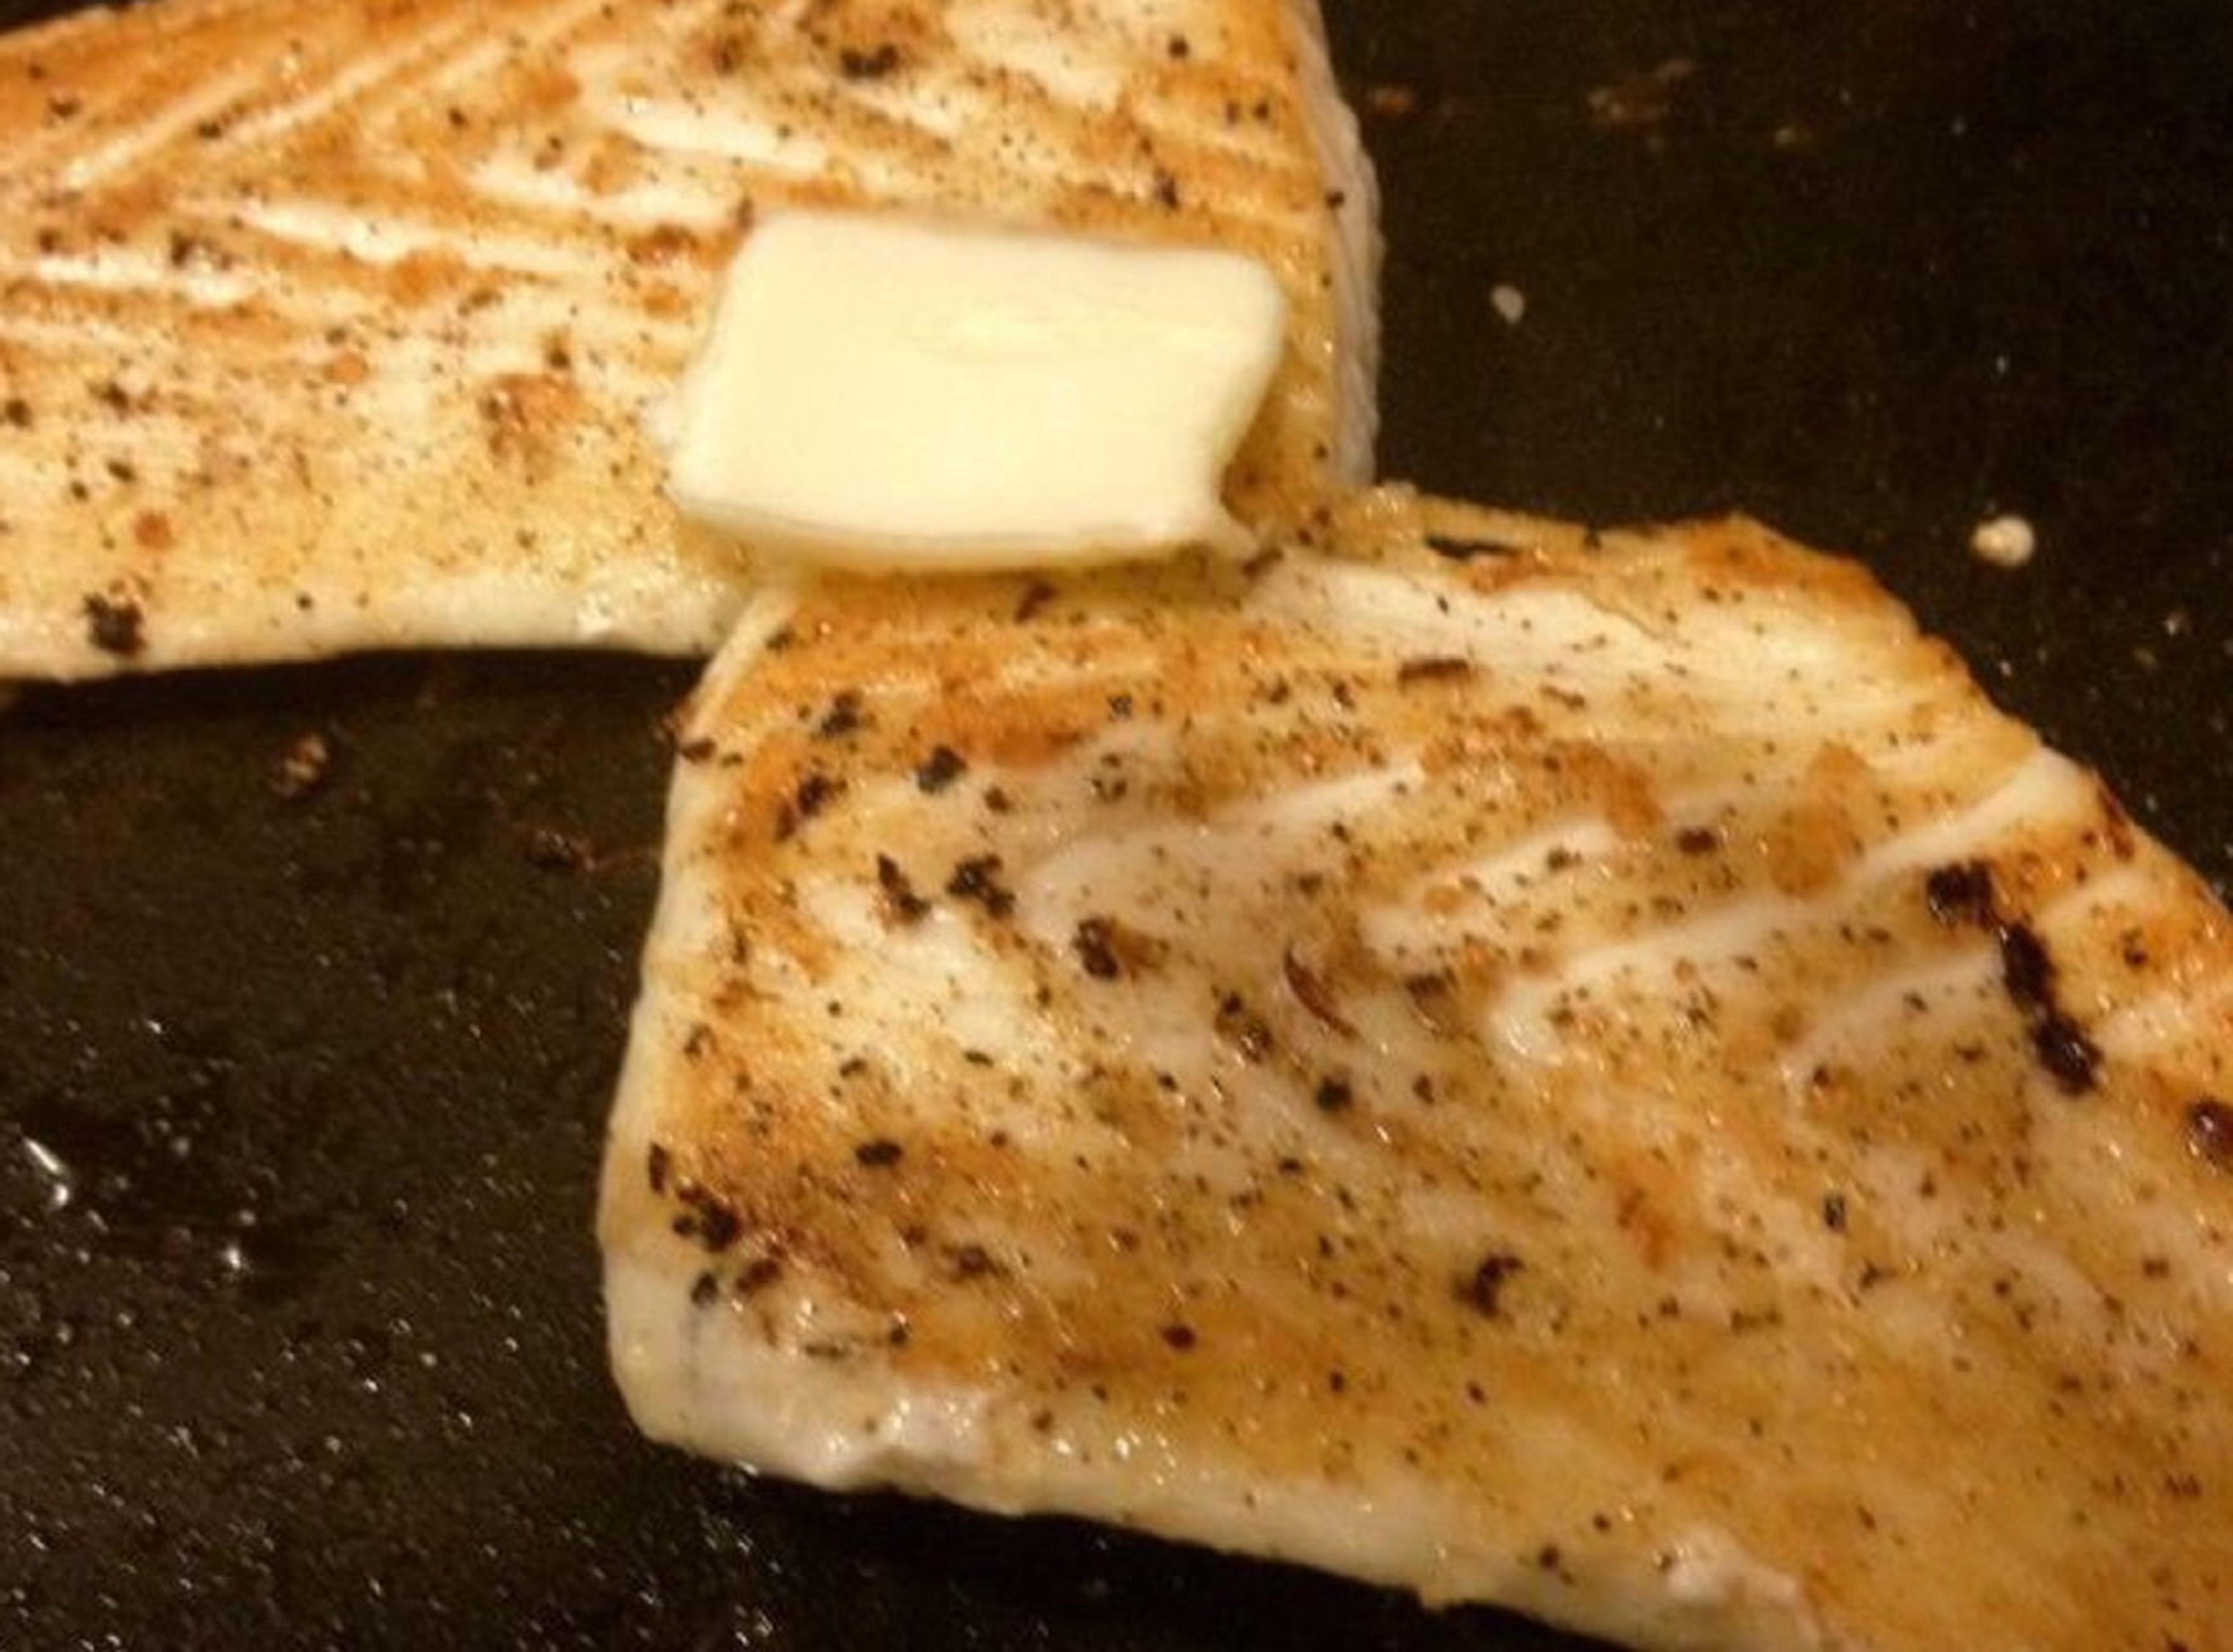 Season both sides of the fish with salt and freshly-cracked pepper. Brown both sides of the halibut in the bacon fat. Cook the first side for 4 – 5 min., then turn over. Place butter on the fish. Cook the other side for 3 – 4 min.